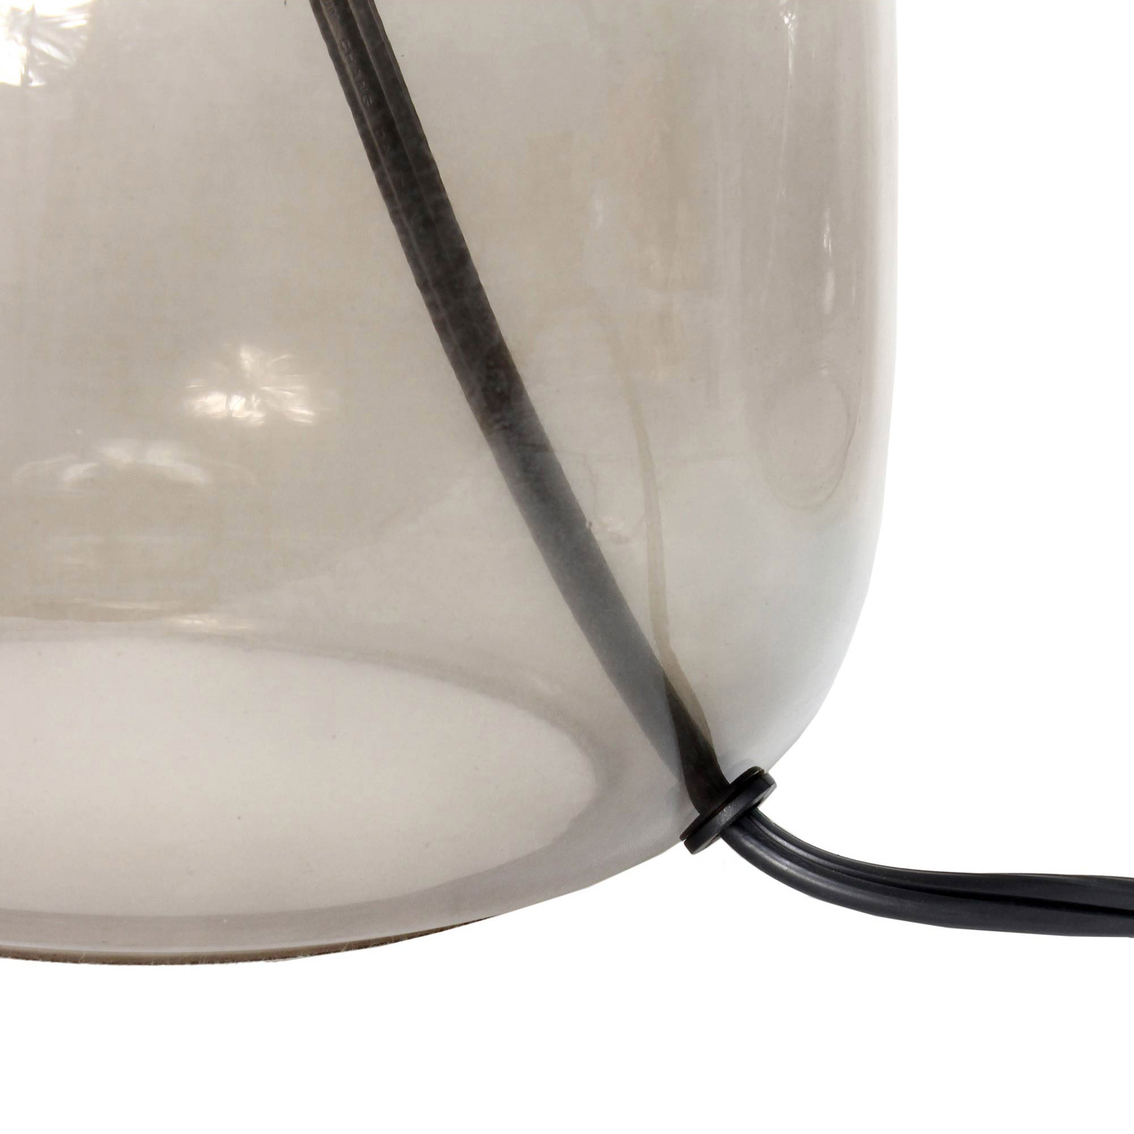 Simple Designs 13 in. Glass Table Lamp - Image 5 of 8